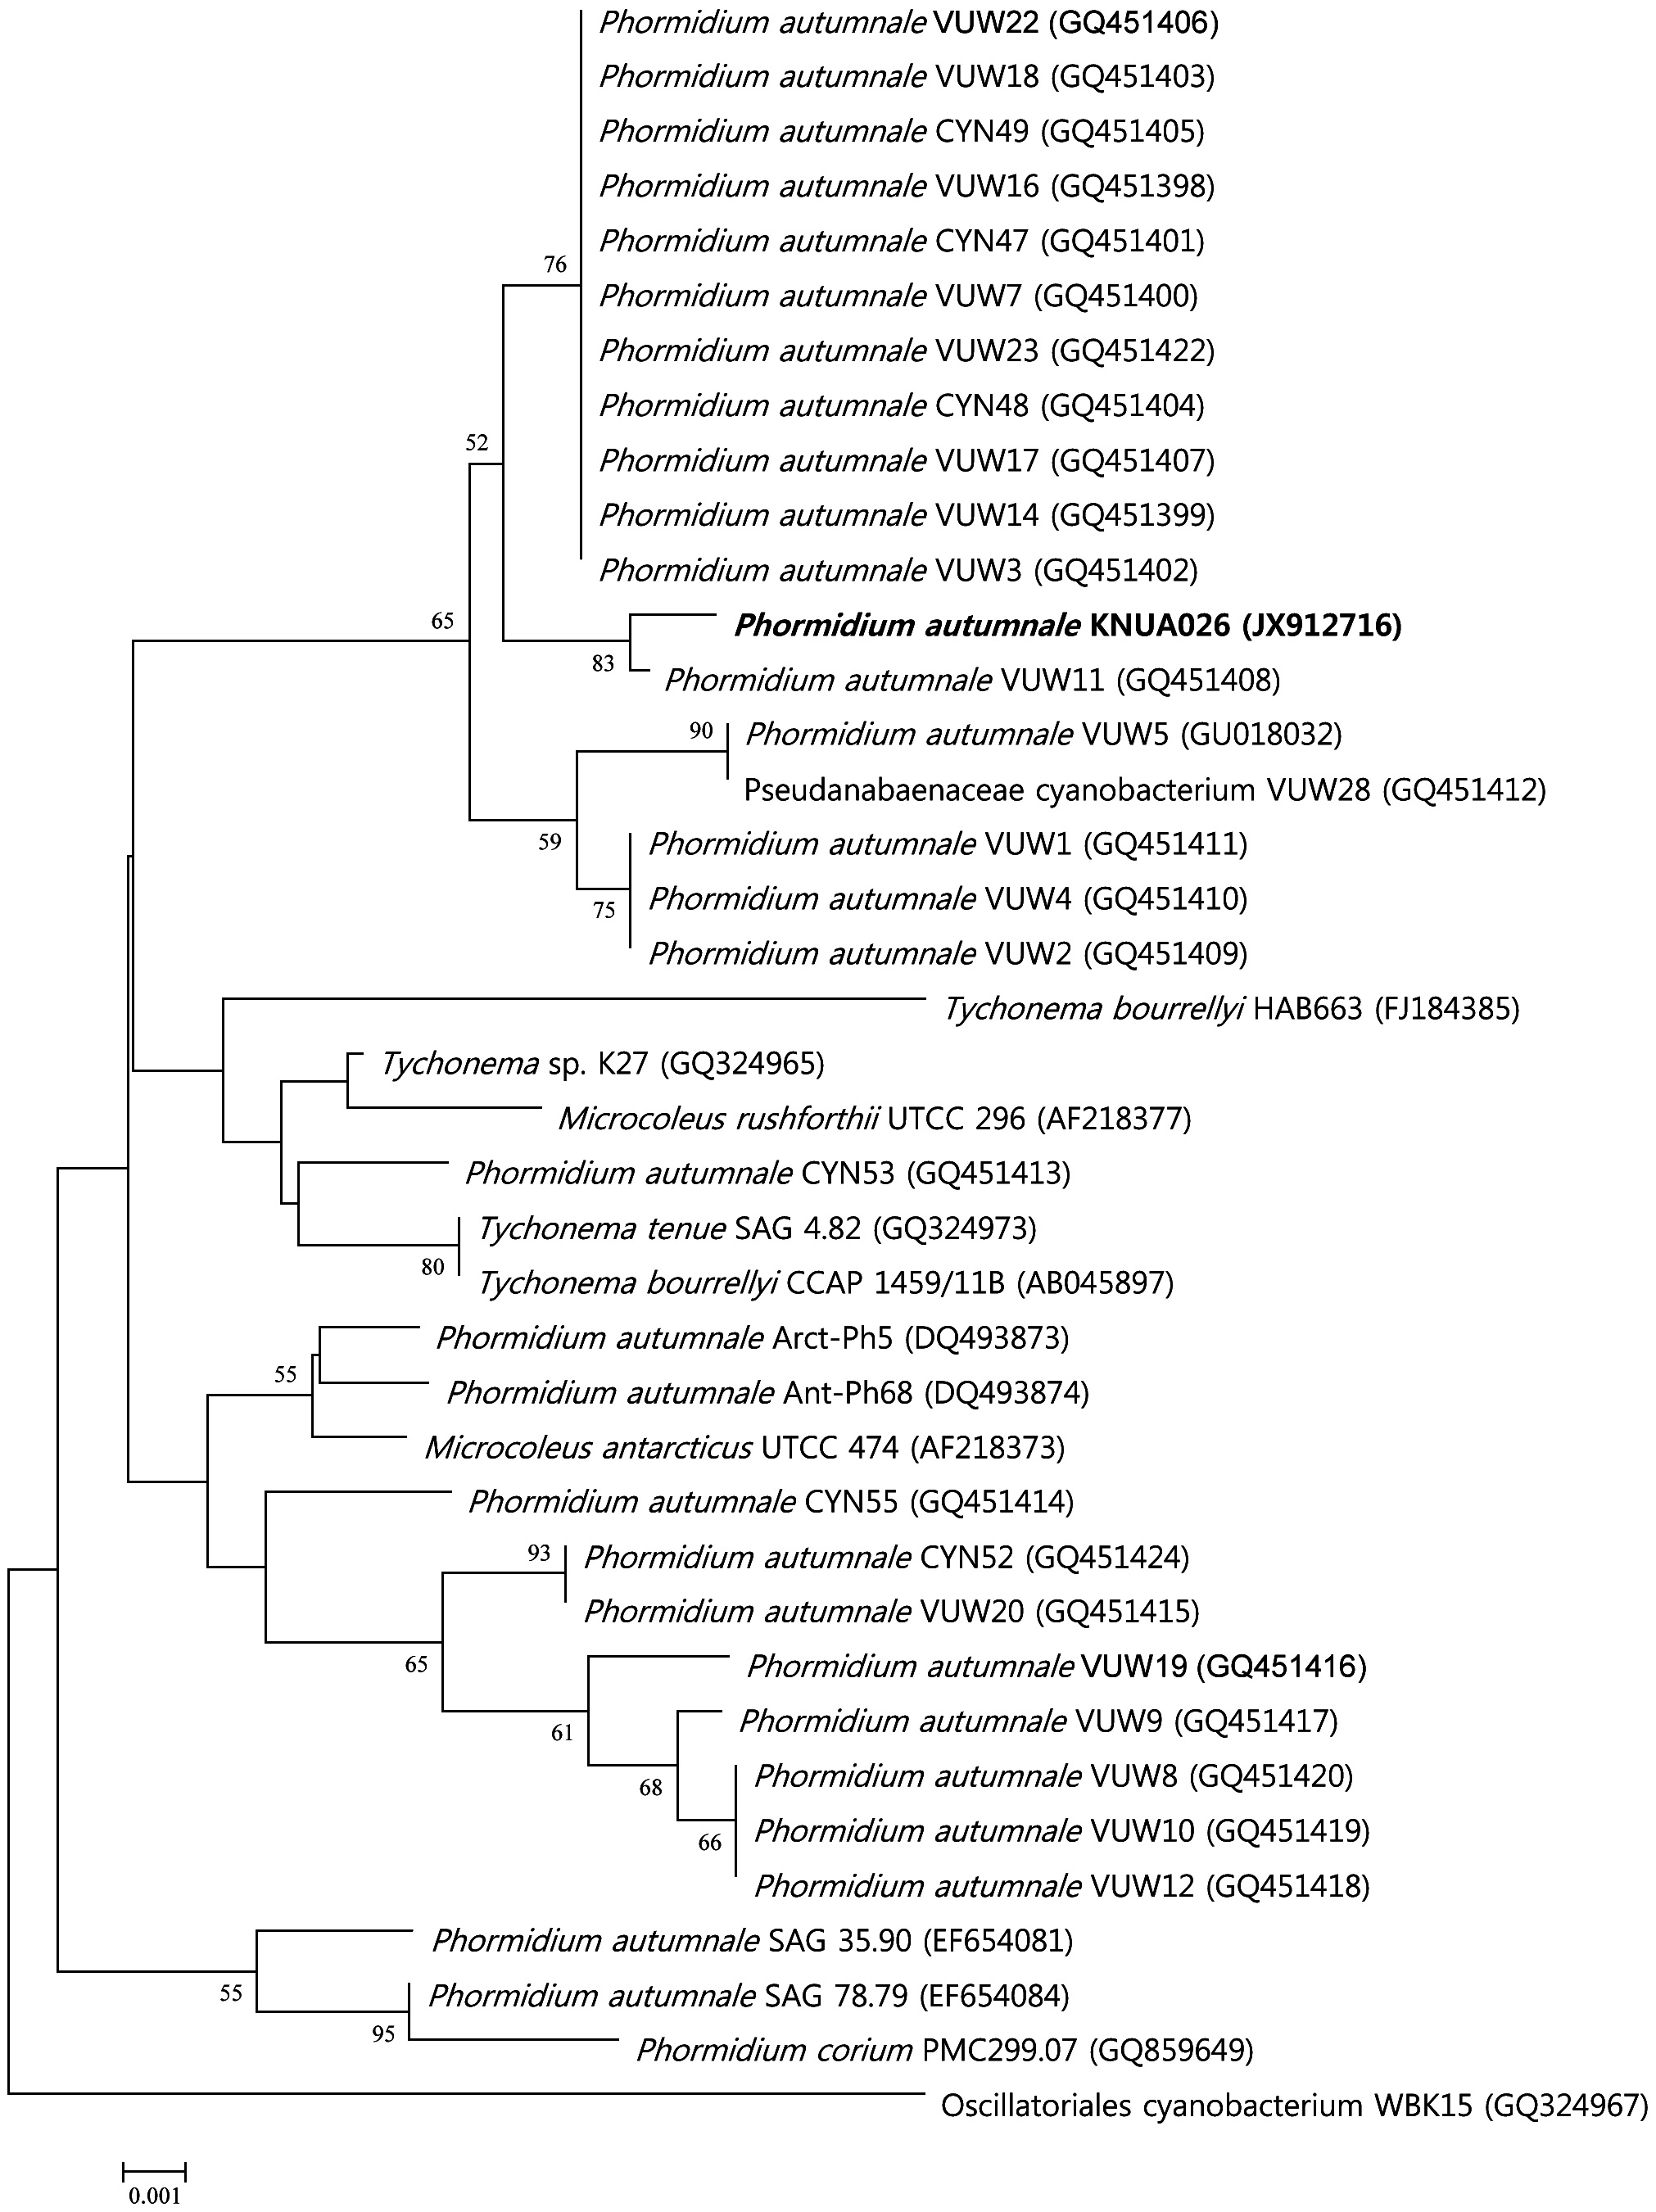 The phylogenetic relationship of strain KNUA026 and its closely related species inferred from the 16S rRNA sequence data. The scale bar represents a 0.1% difference in nucleotide sequences. GenBank accession numbers are provided in parentheses.